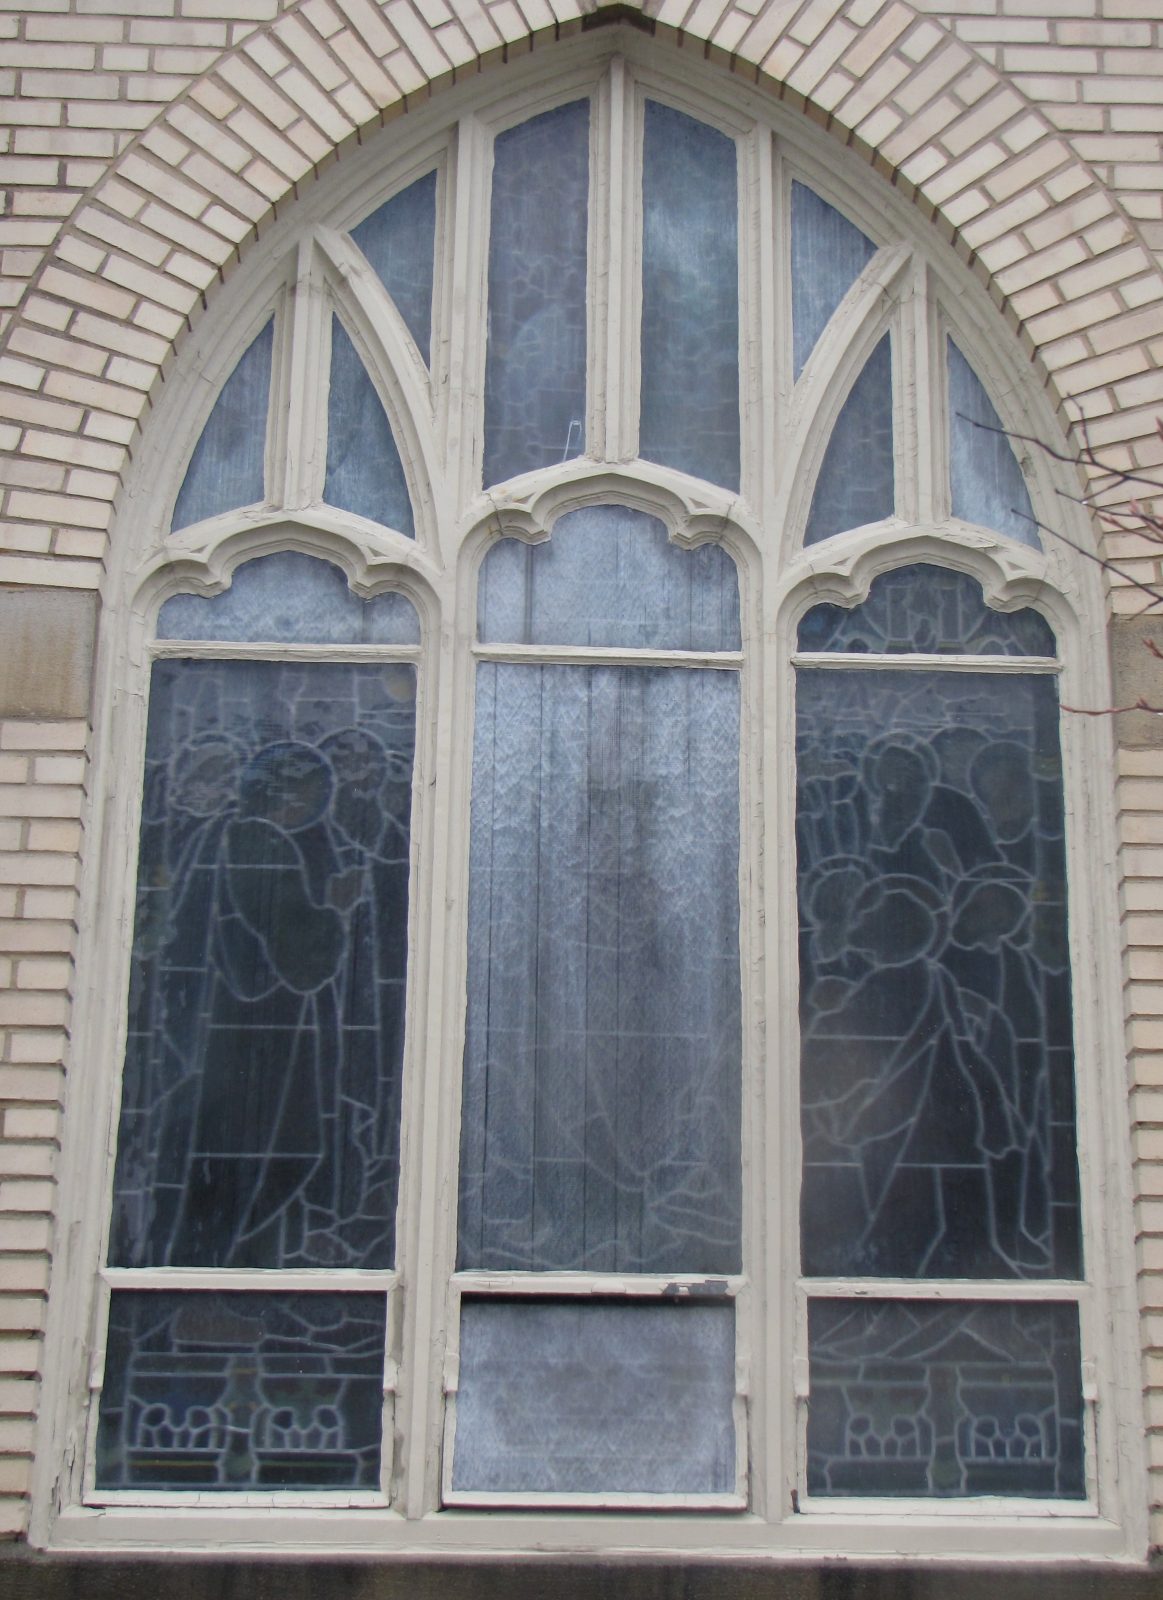 church stained glass window protective coverings, church stained glass windows, stained glass window repair